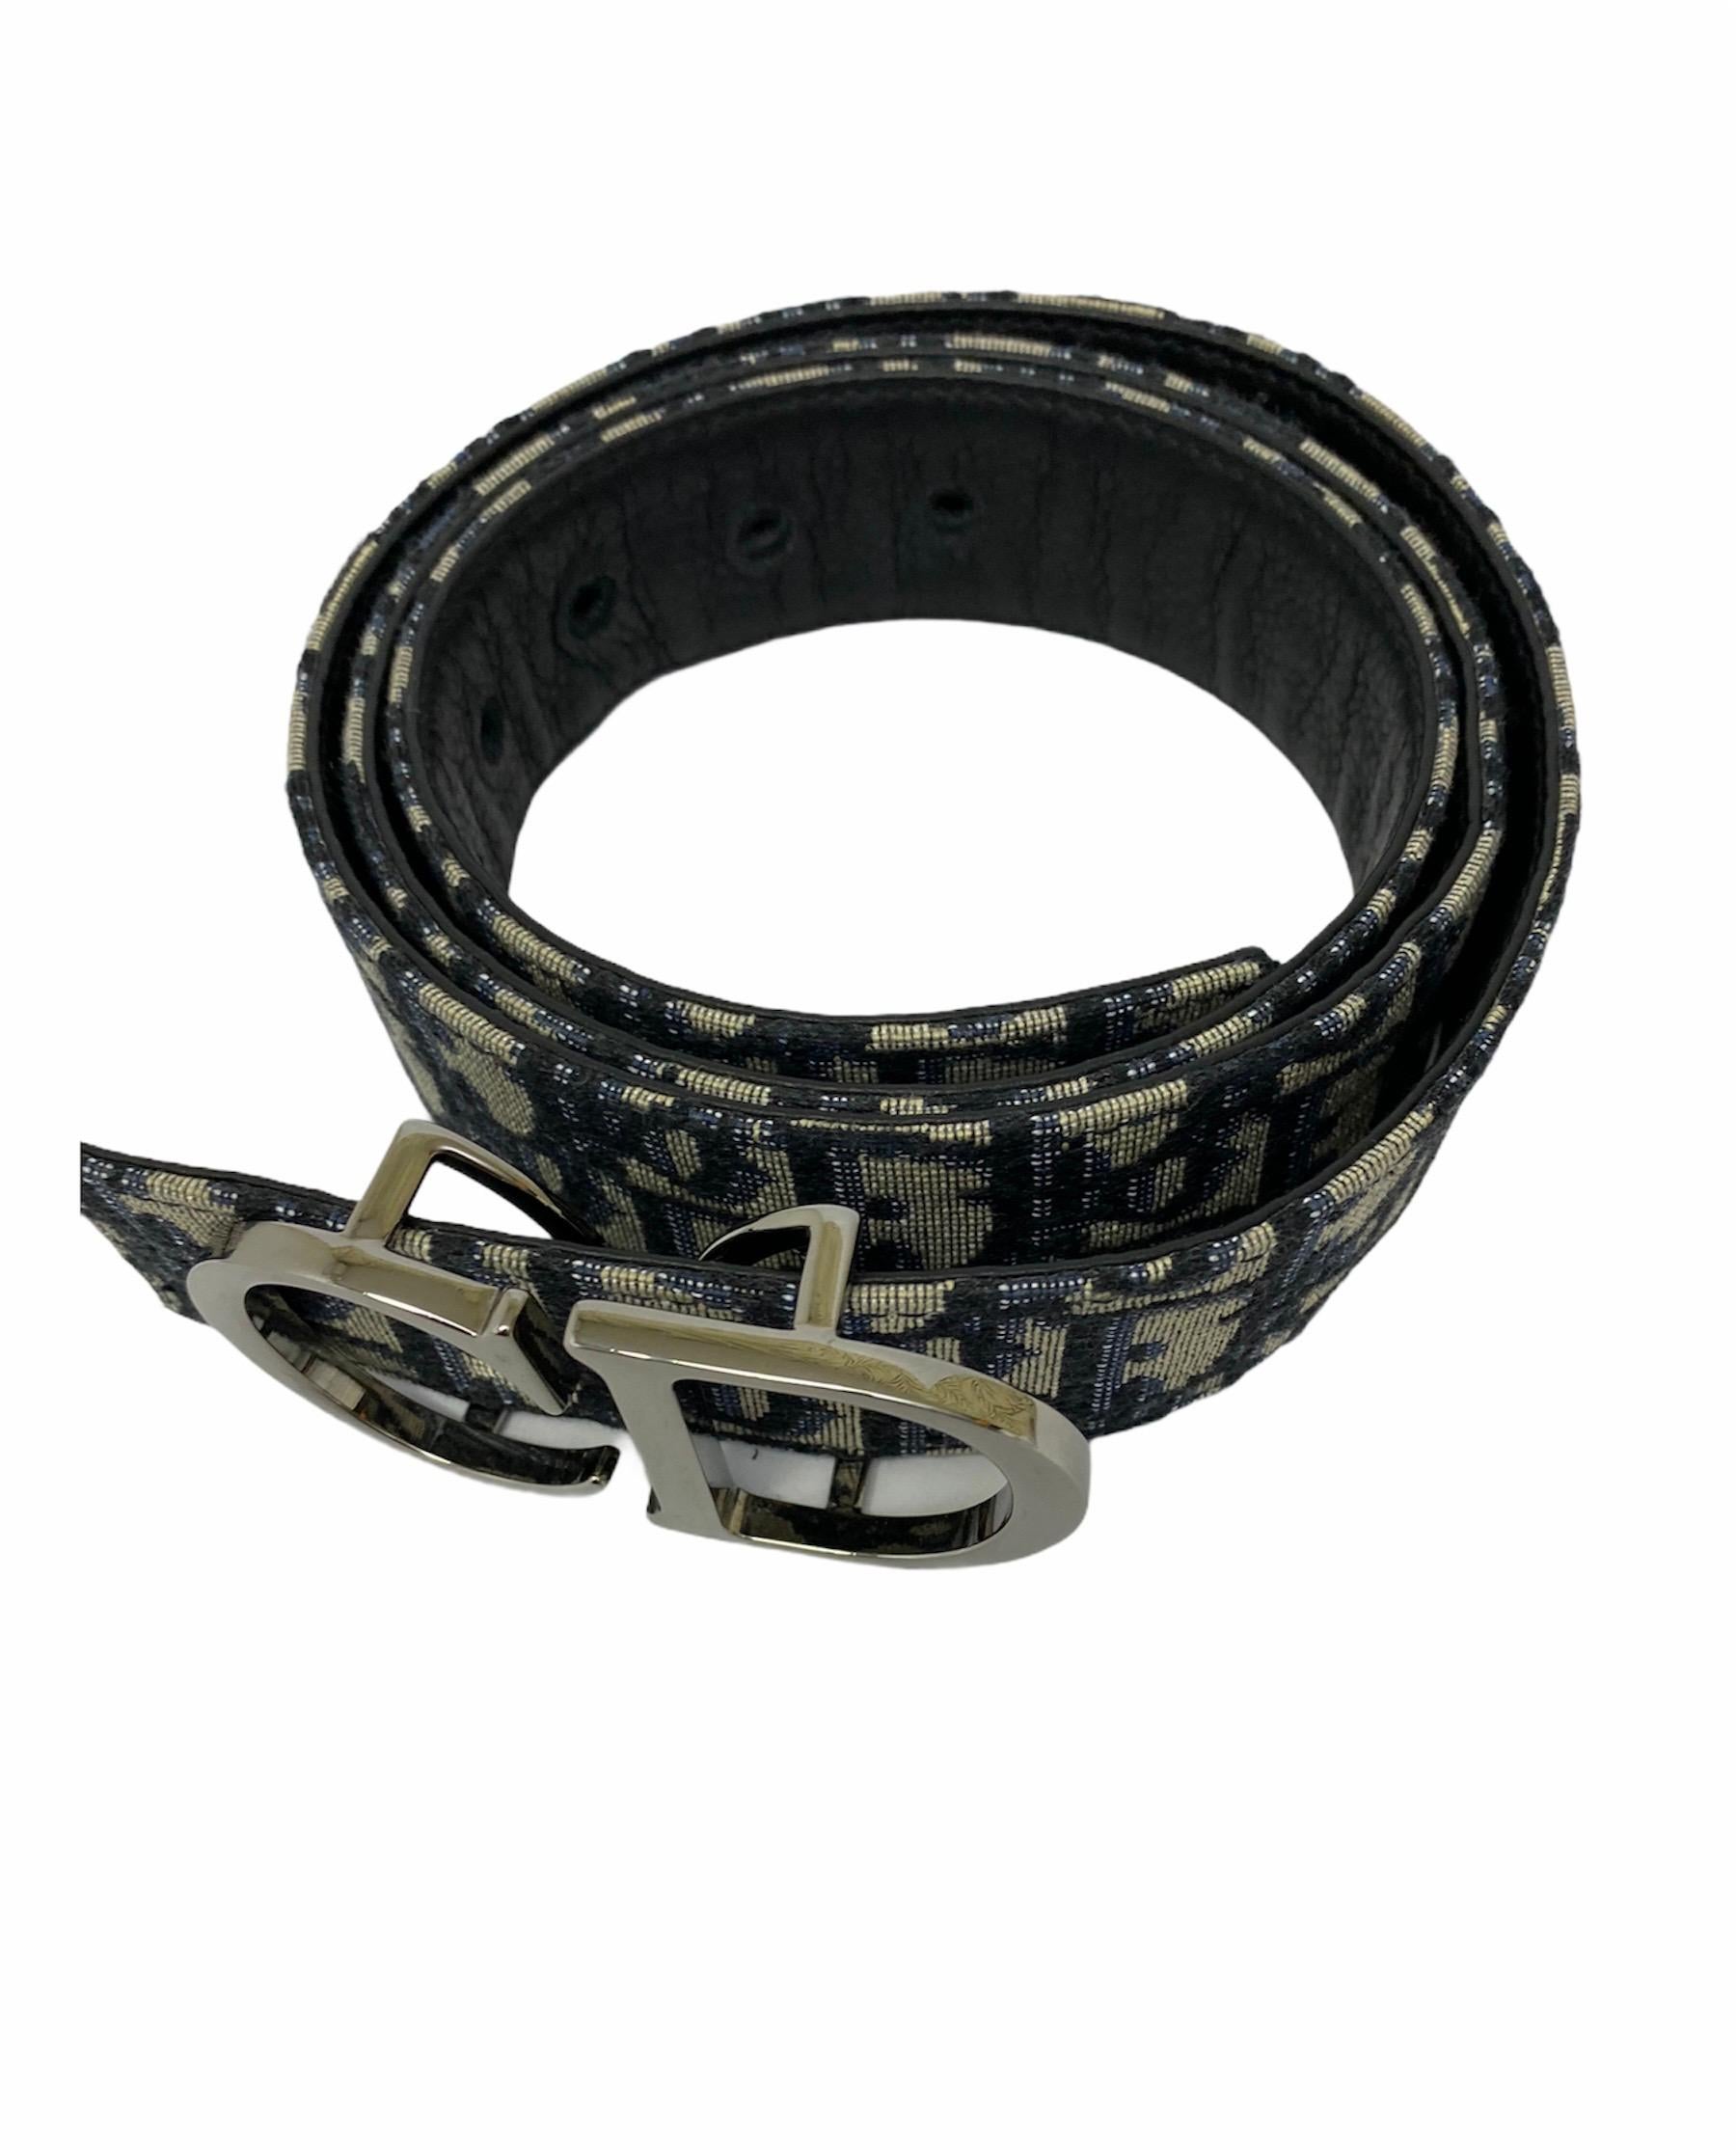 Reversible Dior belt made of white and blue Dior jacquard canvas and silver hardware. The belt measures 115cm in length and 3.5cm in thickness. The buckle can be interchanged to use the belt also on the blue calfskin side. Very good condition.